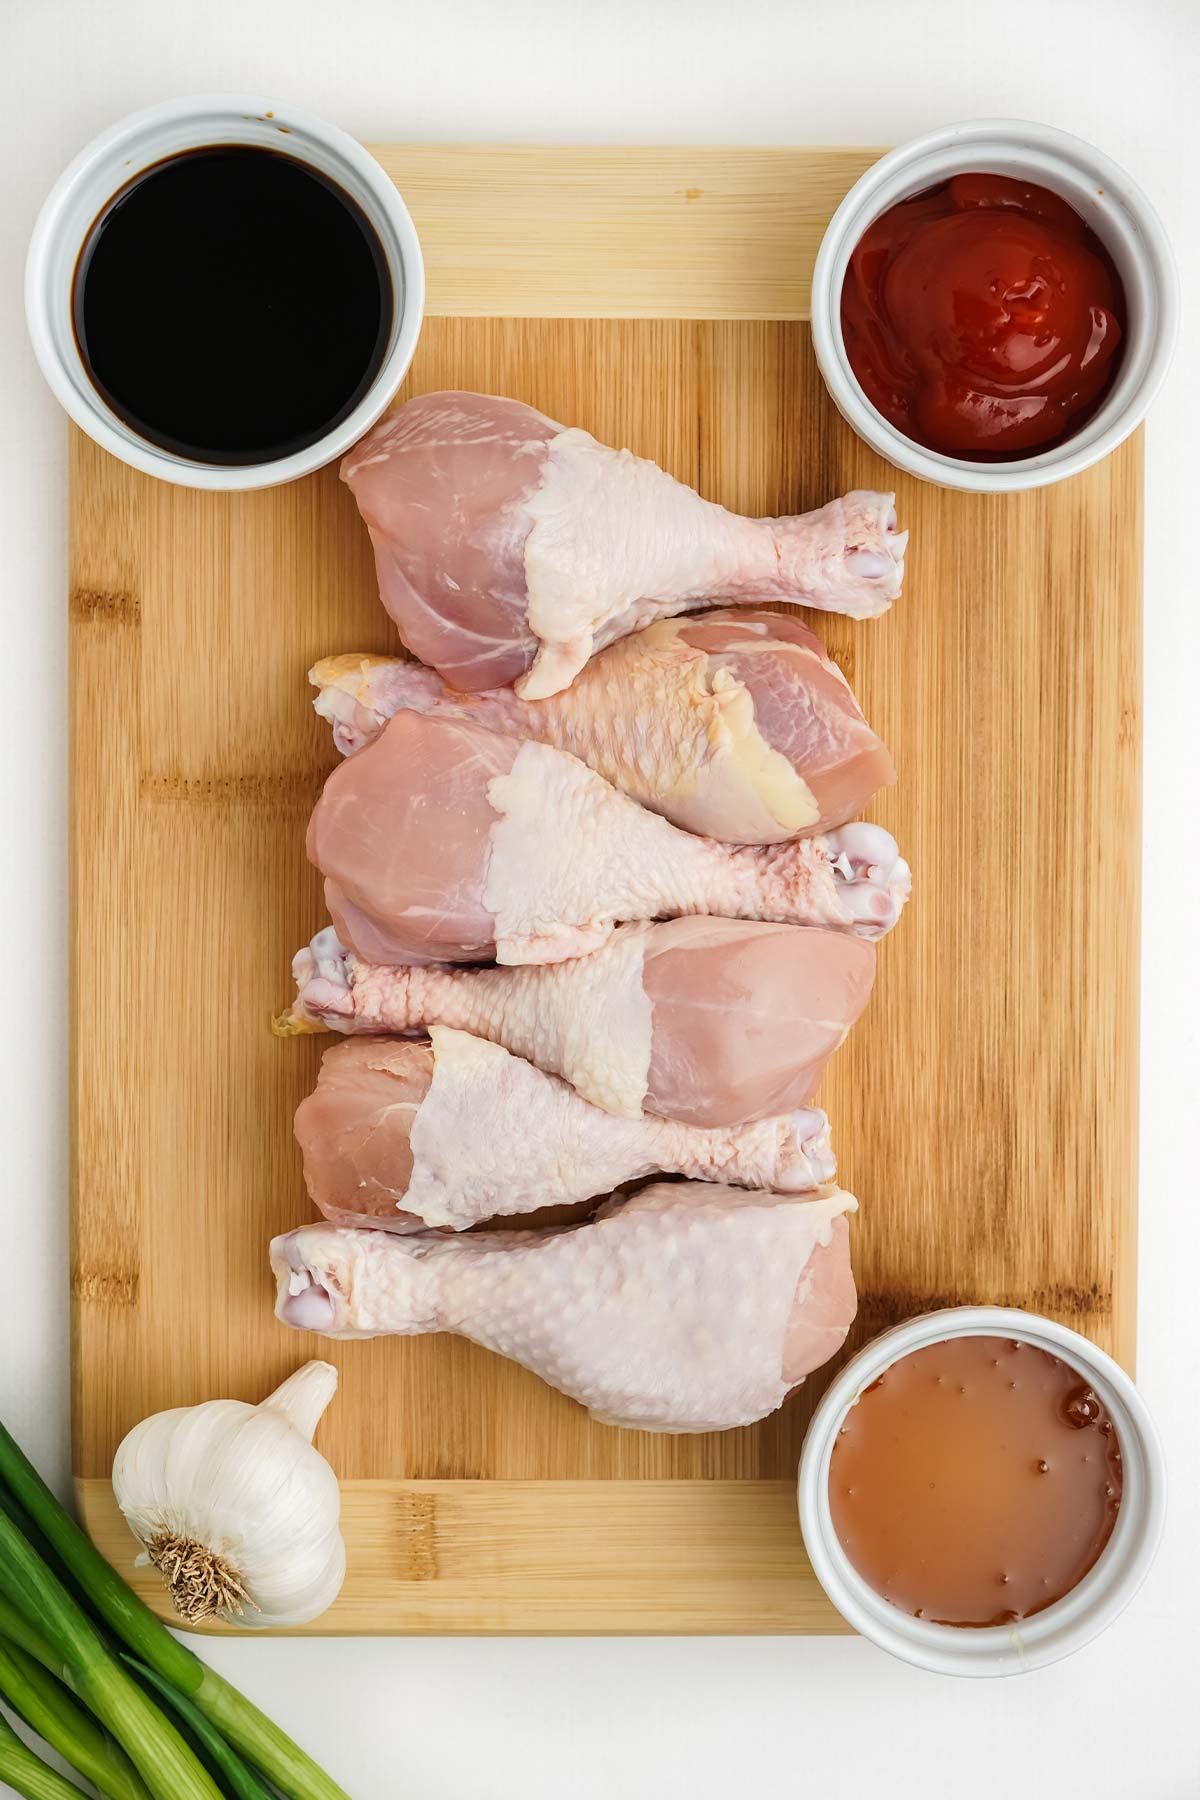 Ingredients to make slow cooker chicken drumsticks on the table.